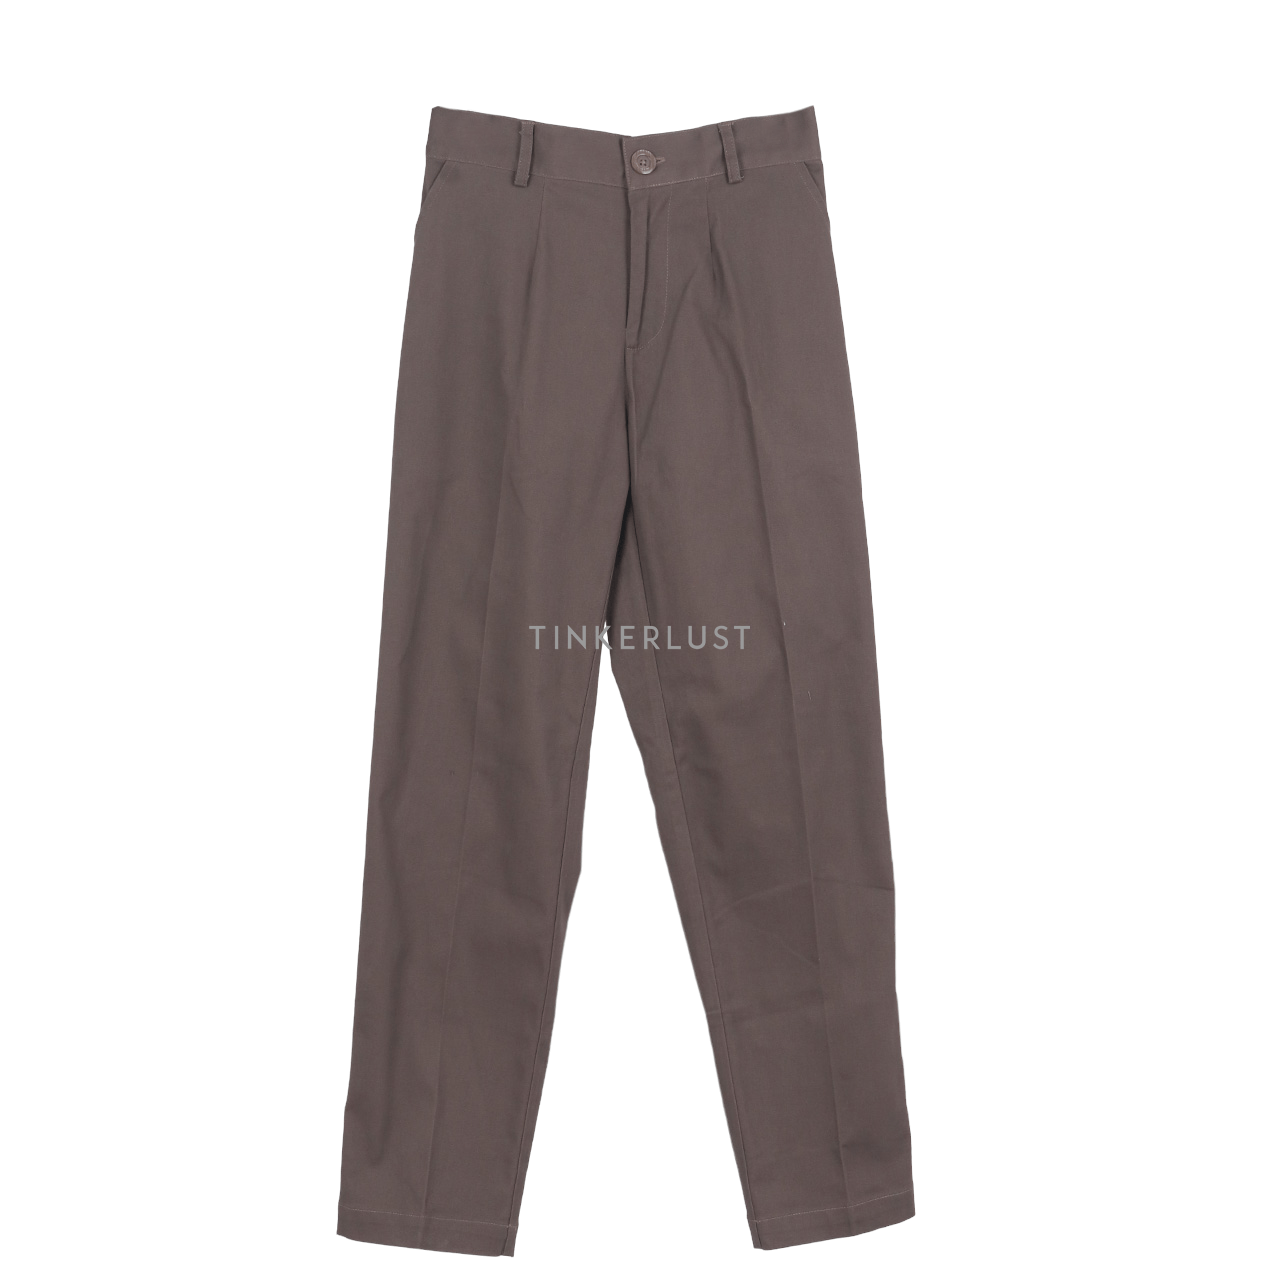 Then Blank Taupe Long Pants